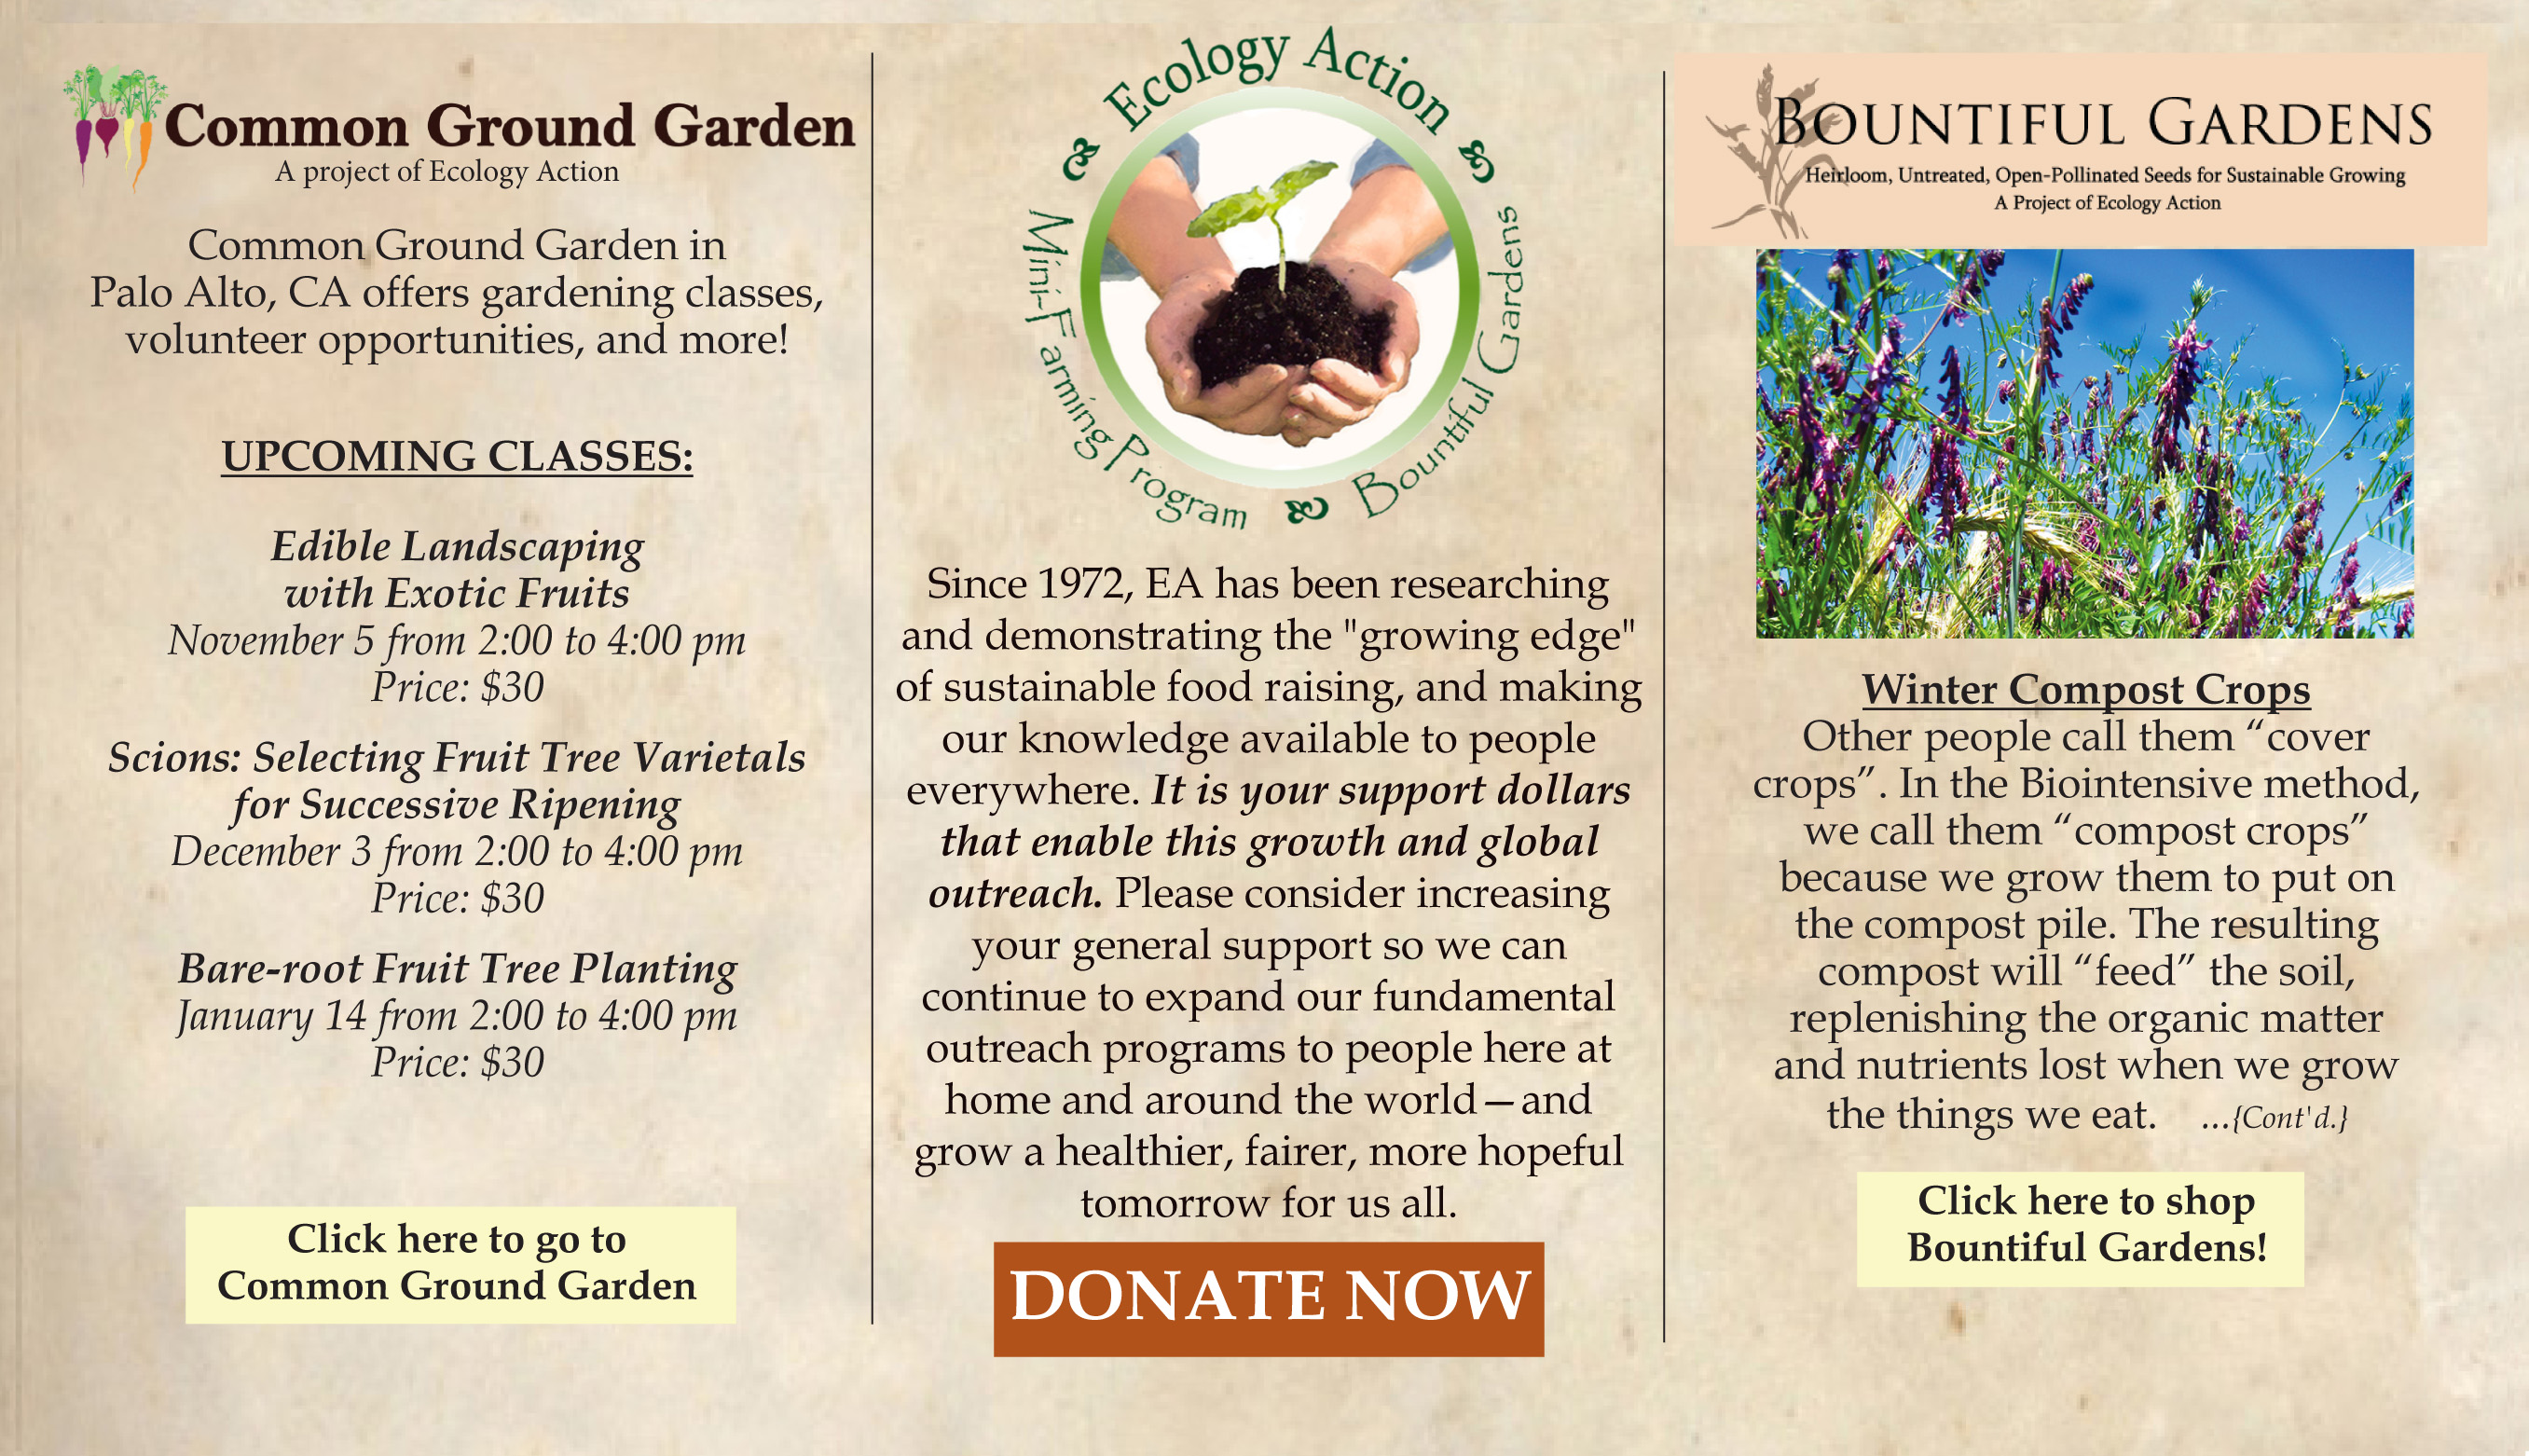 ______
41 Years.
143 Countries.
Millions of people educated.
Millions of garden beds created.
Billions of pounds of fertile soil grown.
...and we're just getting started.
Grow Hope. Grow Abundance.
GROW BIOINTENSIVE!
Please donate to keep our work growing at home and around the world!
https://secure.growbiointensive.org/
___________________________________________
Common Ground Garden 
While the Common Ground Garden Supply and Education Center closed its doors in 2014, our Common Ground Garden in Palo Alto, CA is still growing strong, offering gardening classes for kids and adults, gardening volunteer opportunities, and more! Visit us online to learn more: 
http://www.commongroundgarden.org
___________________________________________
Bountiful Gardens: Seeds, Tools and Books Online
The new 8th edition of John Jeavons' classic Biointensive gardening handbook, How to Grow More Vegetables is available from Ecology Action's online store, Bountiful Gardens, along with organic seeds, quality tools and other books, articles and videos on sustainable living.
http://www.bountifulgardens.org
___________________________________________
©2015 Ecology Action. All Rights Reserved.
---------------------------------------------------------------------